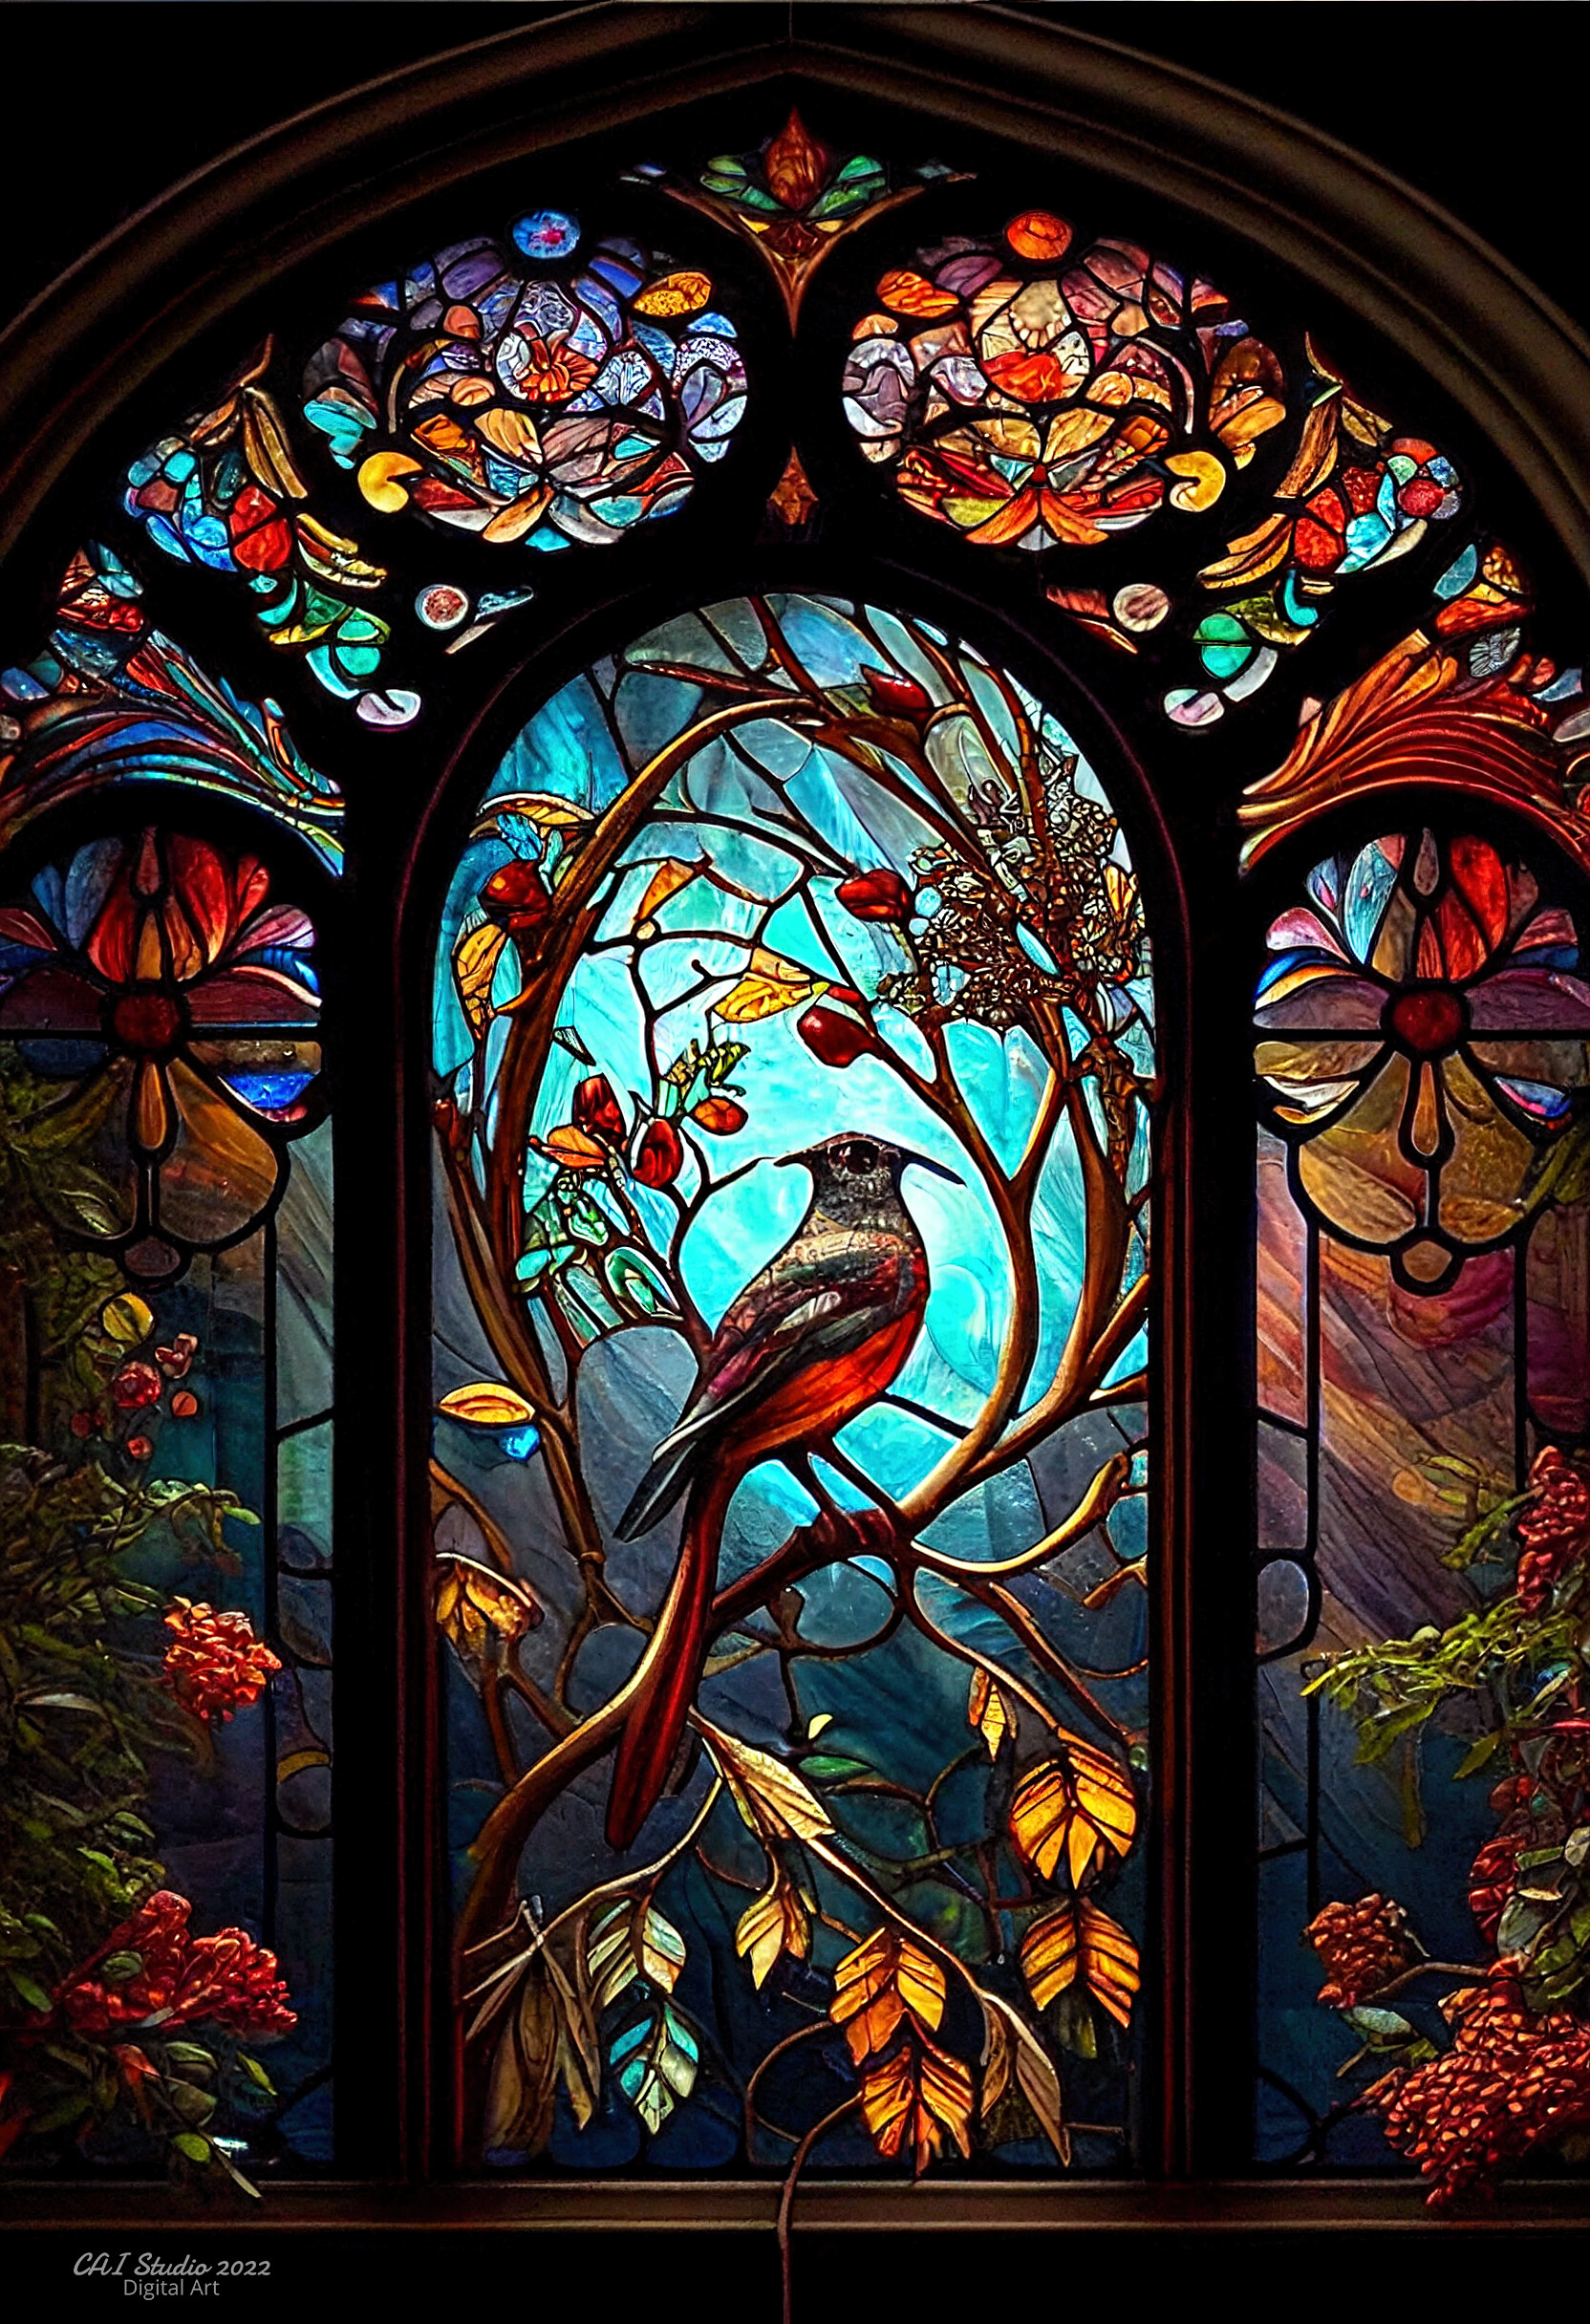 https://cdnb.artstation.com/p/assets/images/images/061/207/953/large/christer-w-stained-glass-window-05.jpg?1680241383